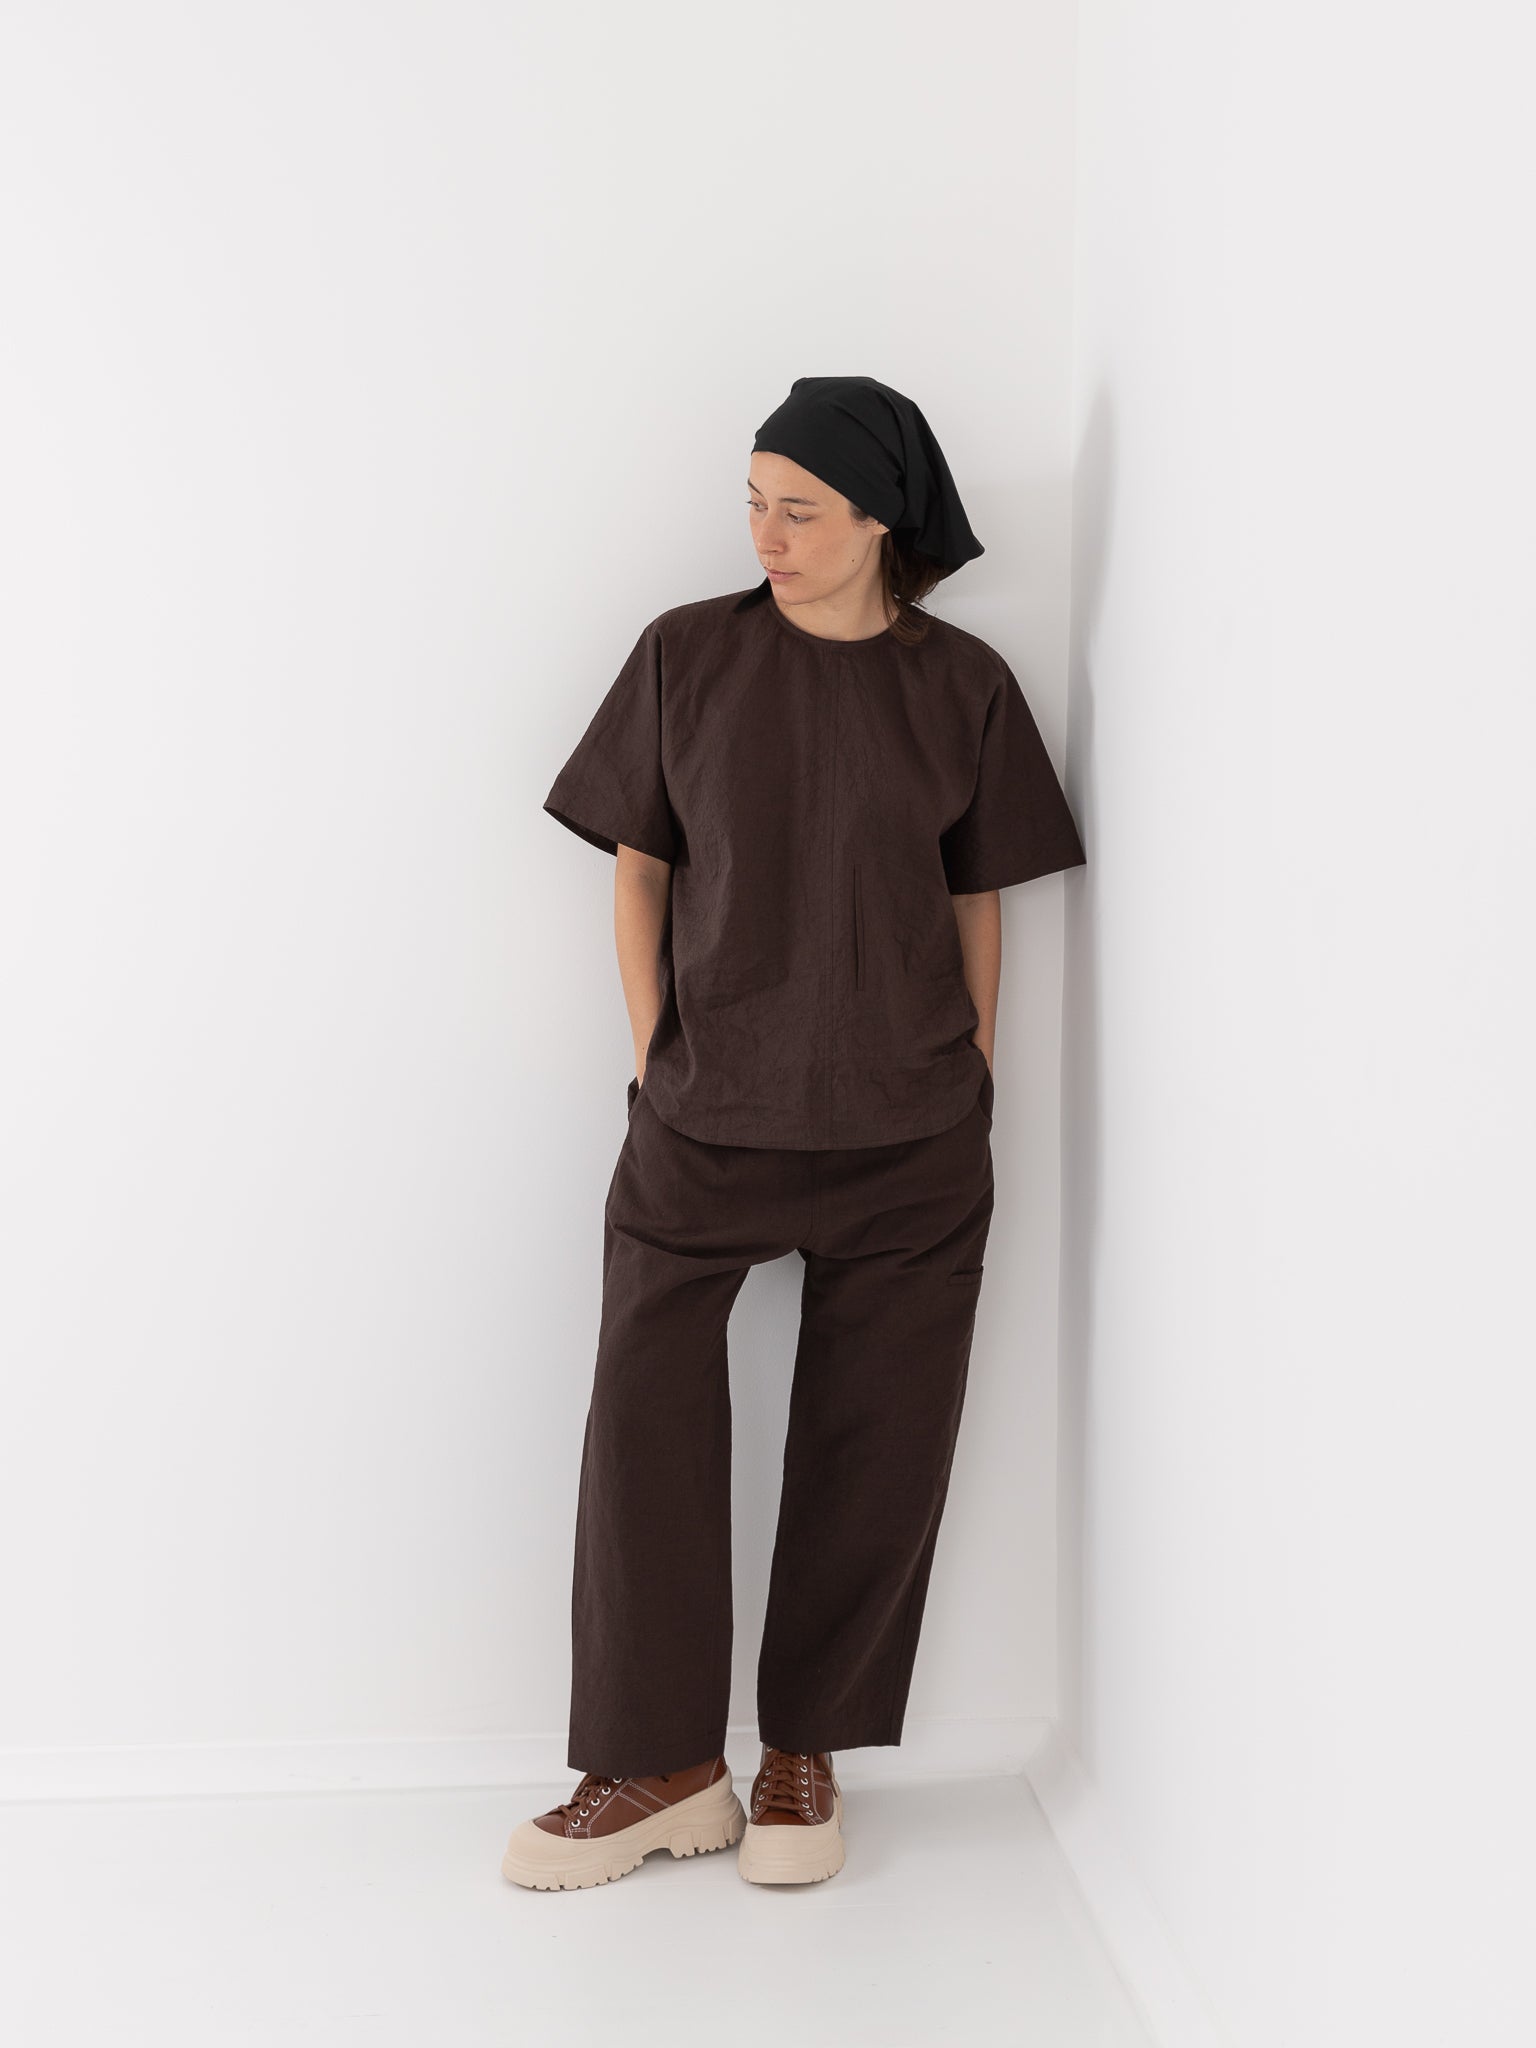 Sofie D'Hoore Pluck Pant, Cacao - Worthwhile, Inc.